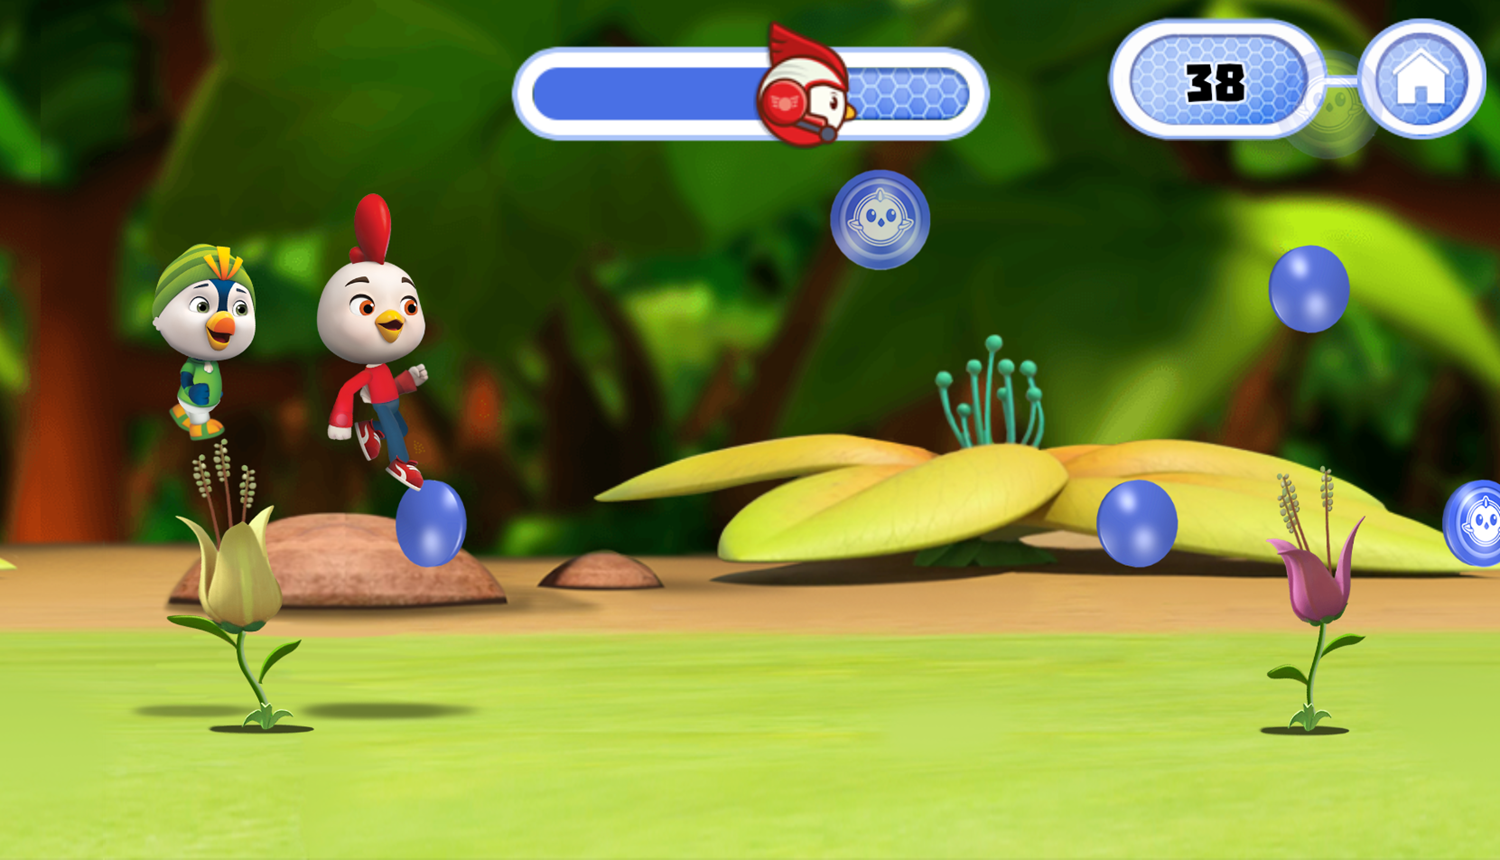 Top Wing Friends to the Rescue Game Stage 1 Gameplay Screenshot.